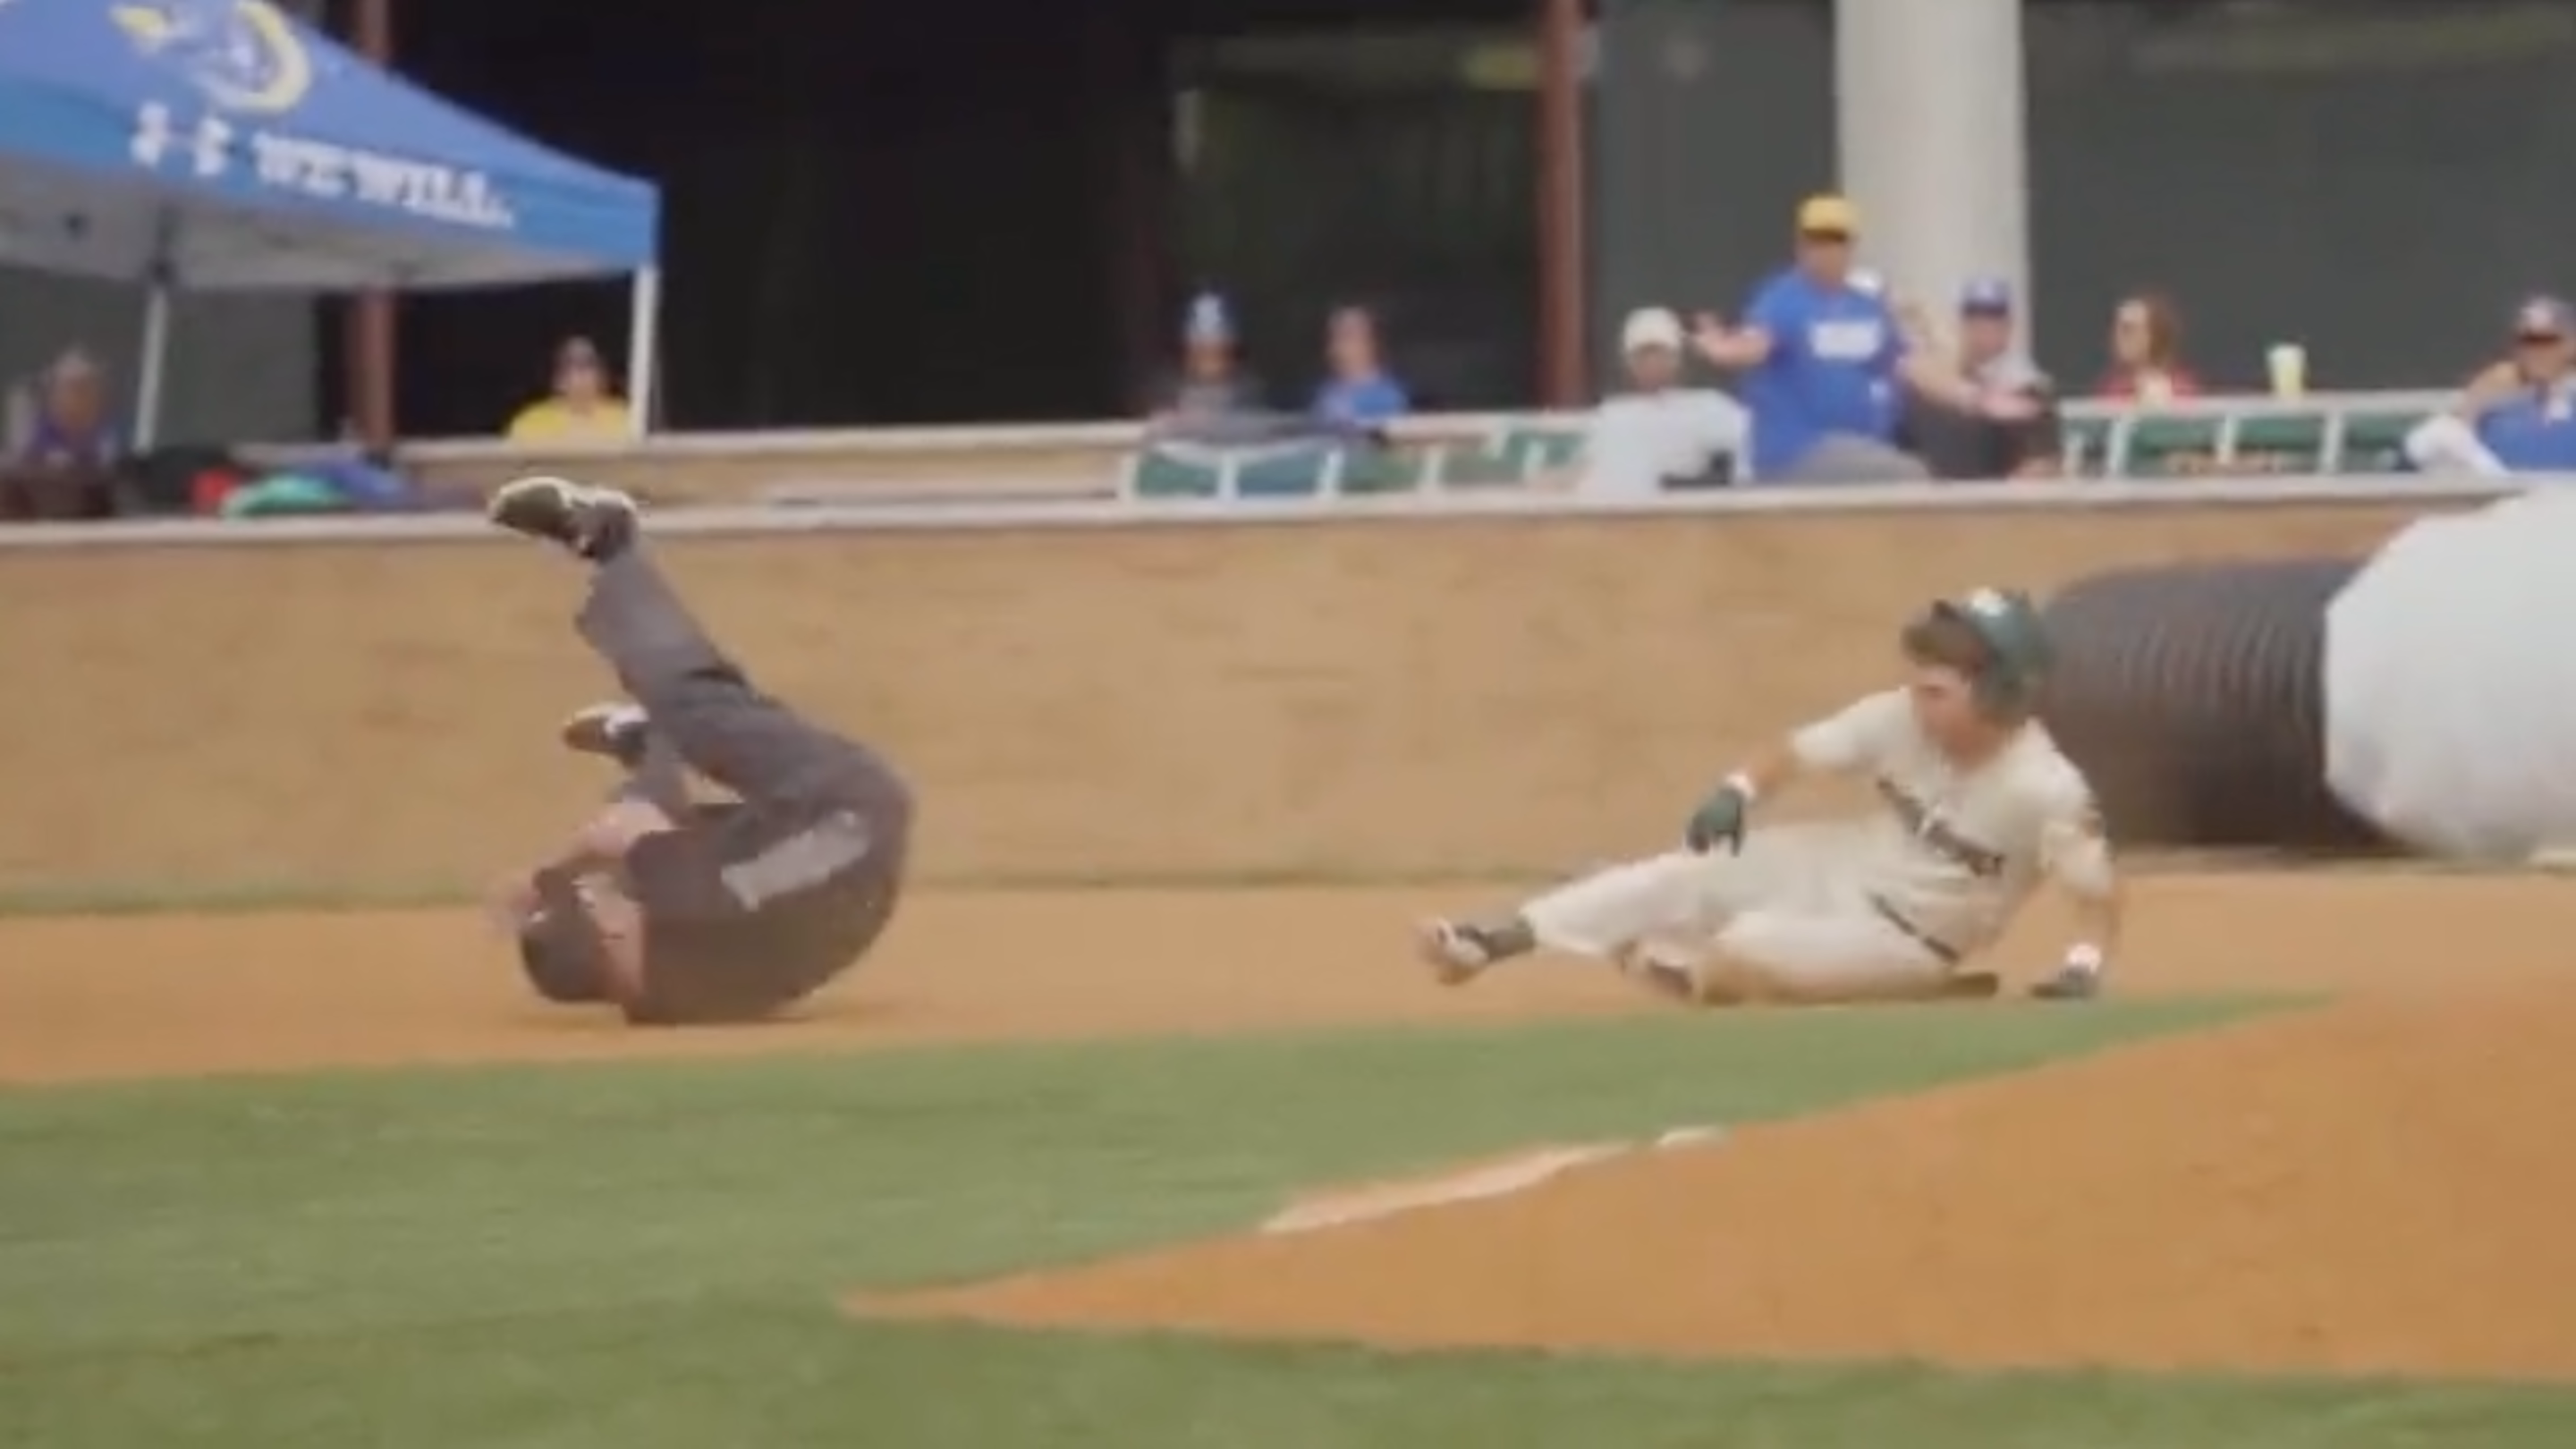 College Team's Season Ends After Umpire Calls Out Baserunner He Just
Tackled